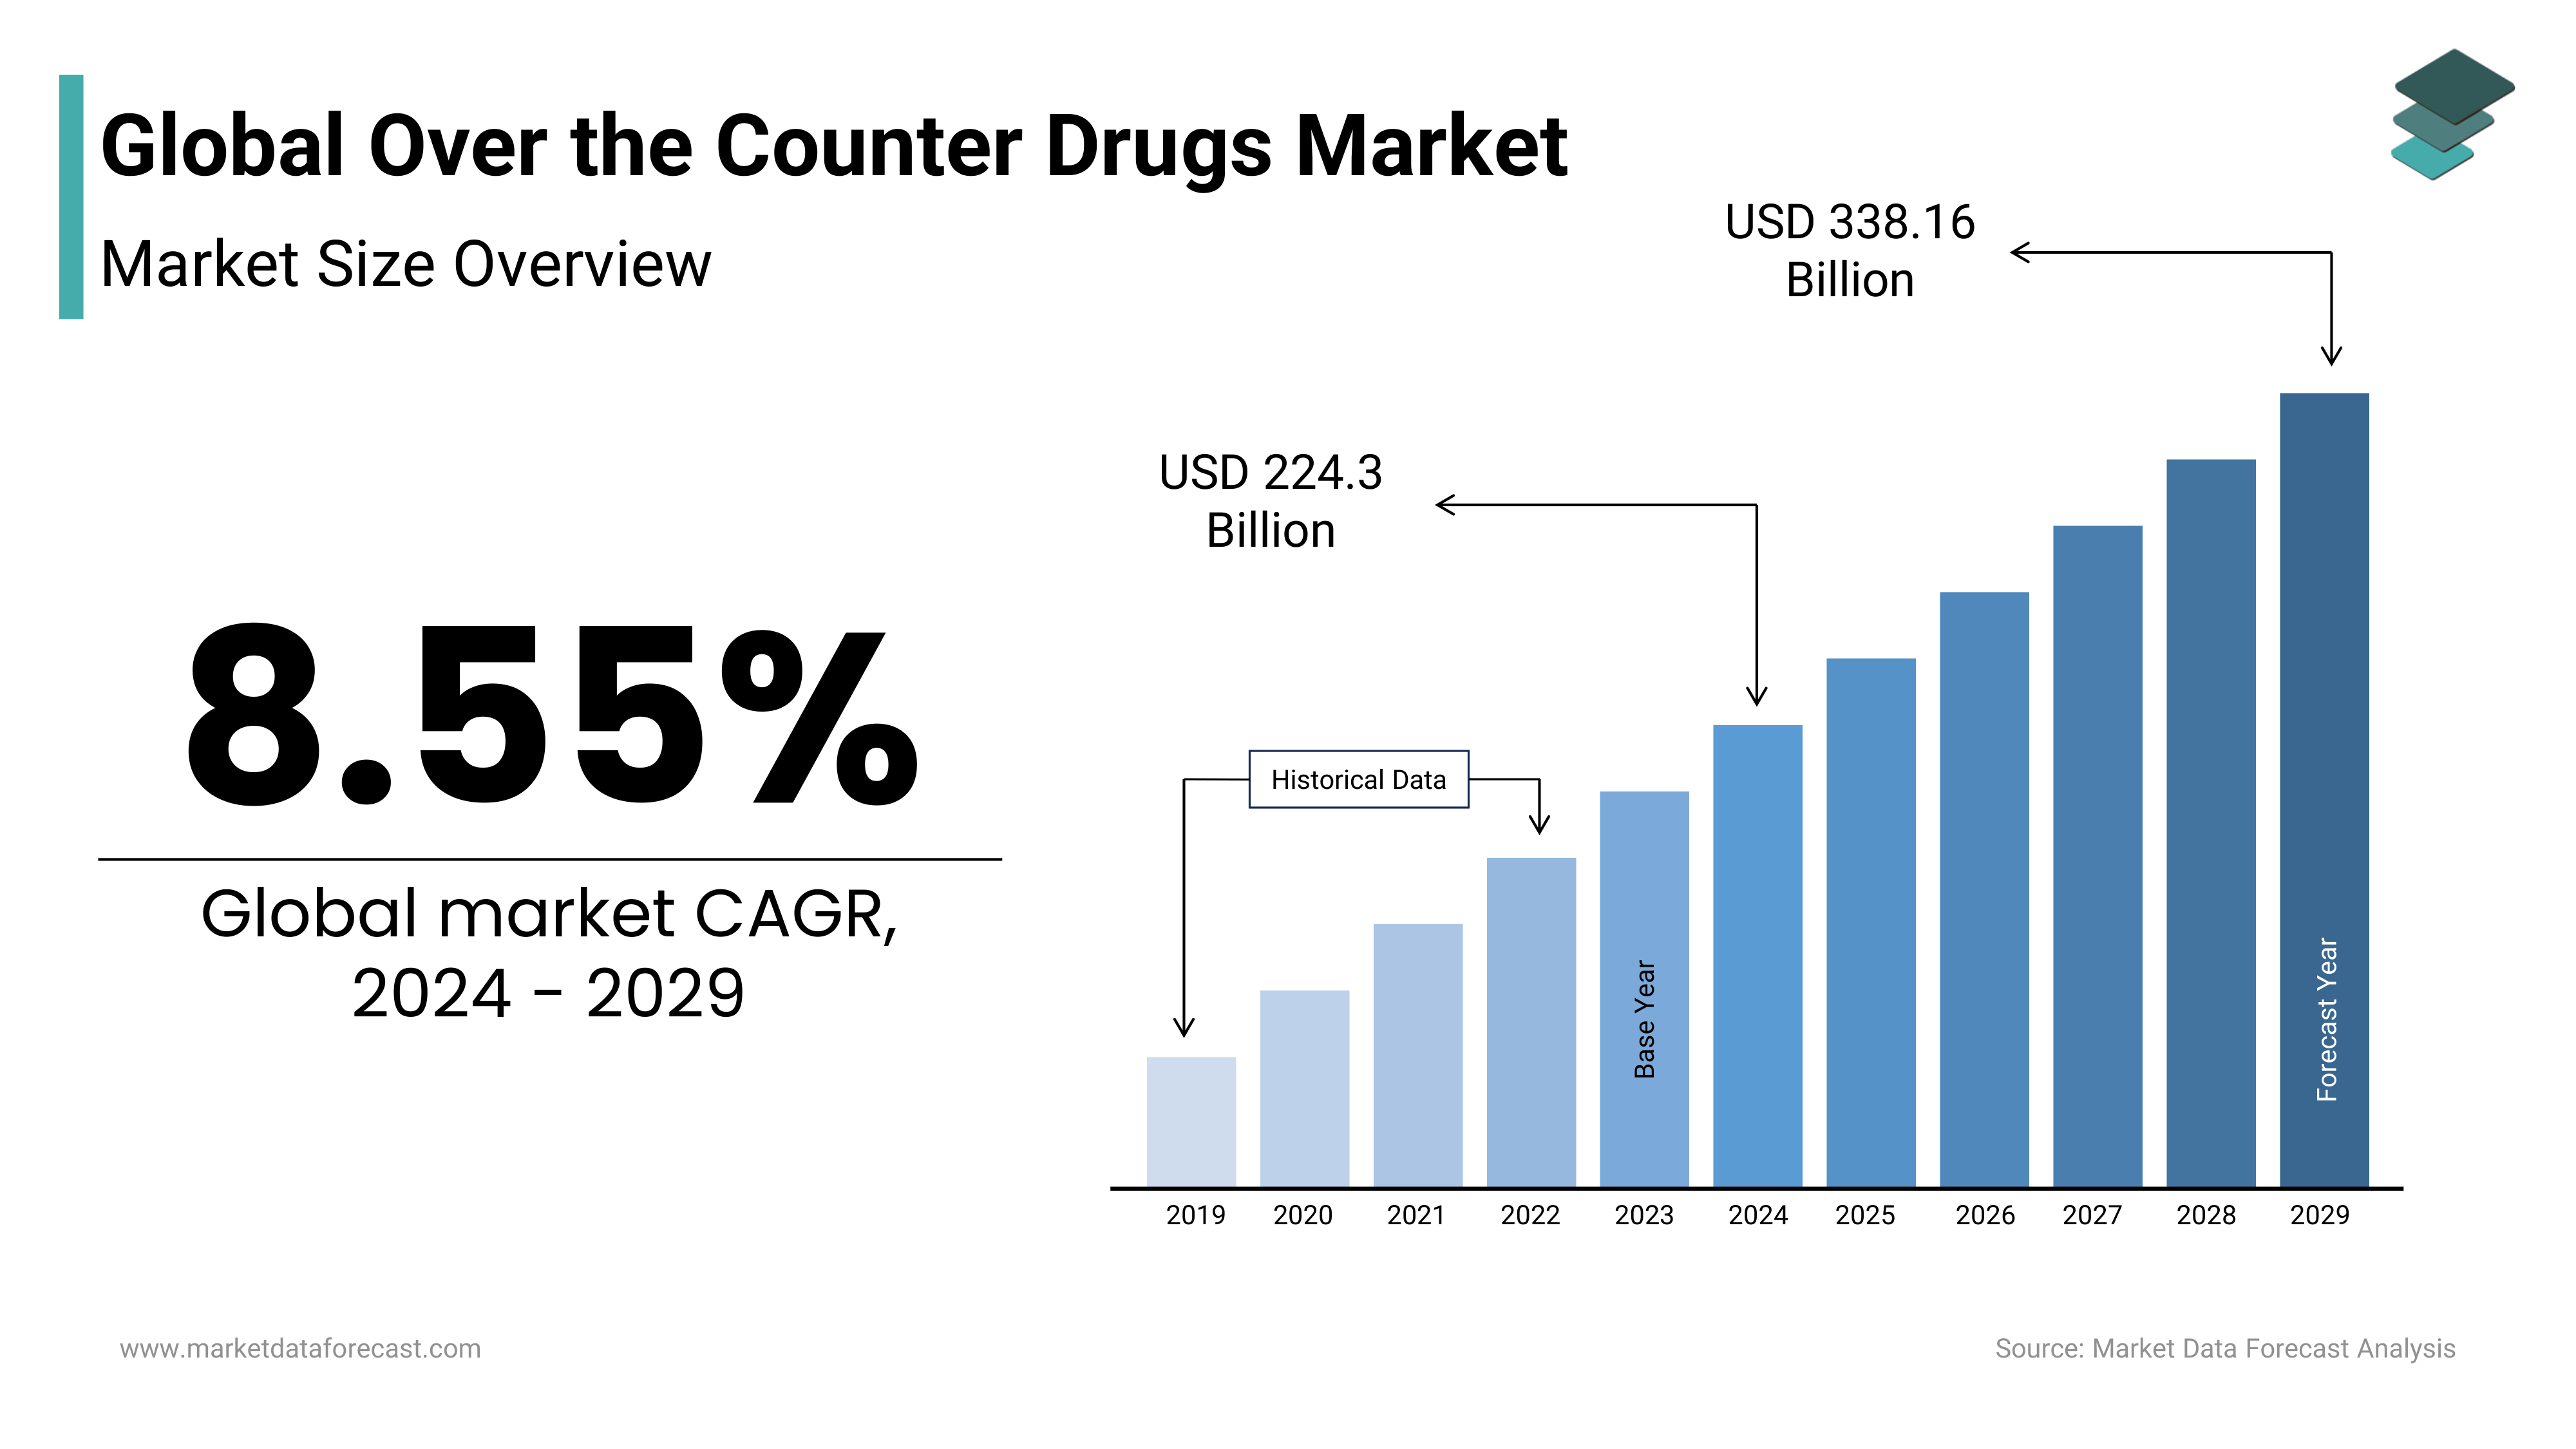 The global over the counter drugs market is poised to reach USD 338.16 billion by 2029